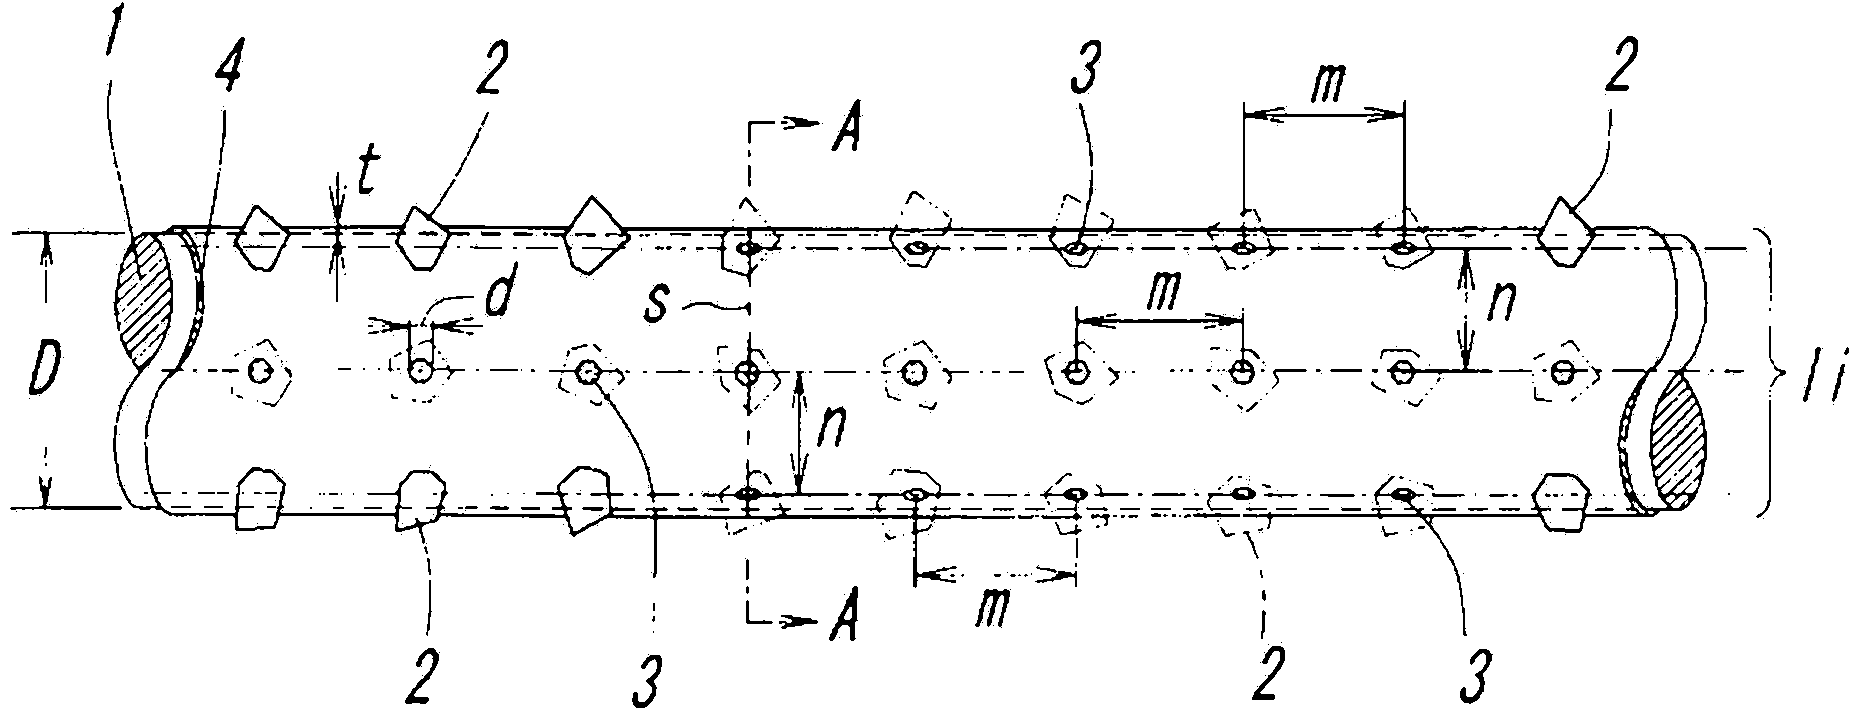 Fixed-abrasive-grain wire-saw, method for manufacturing same, and method for cutting workpiece using same